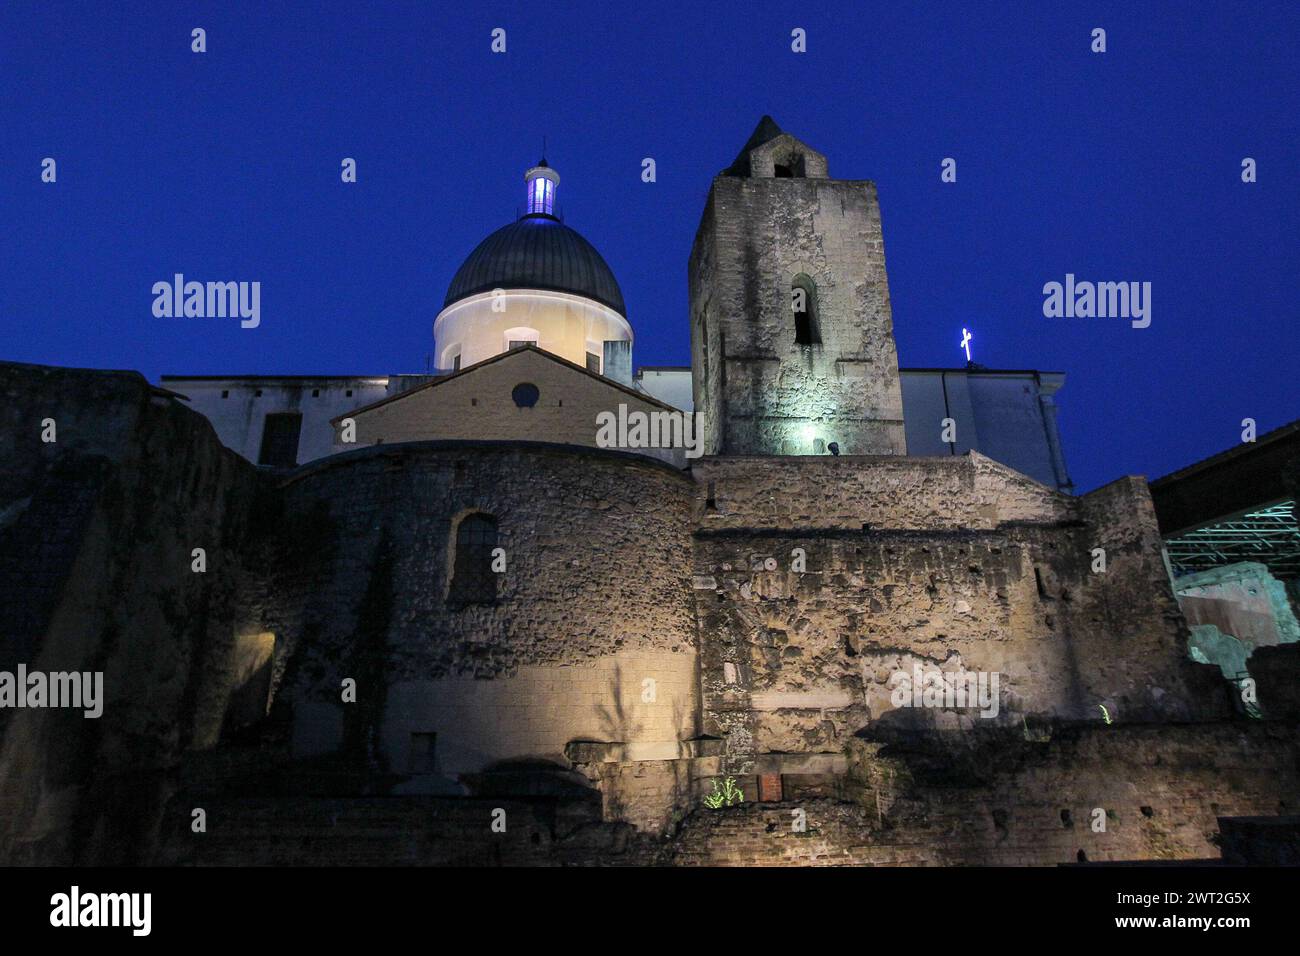 An external view of the Paleochristian Basilicas in Cimitile. Stock Photo